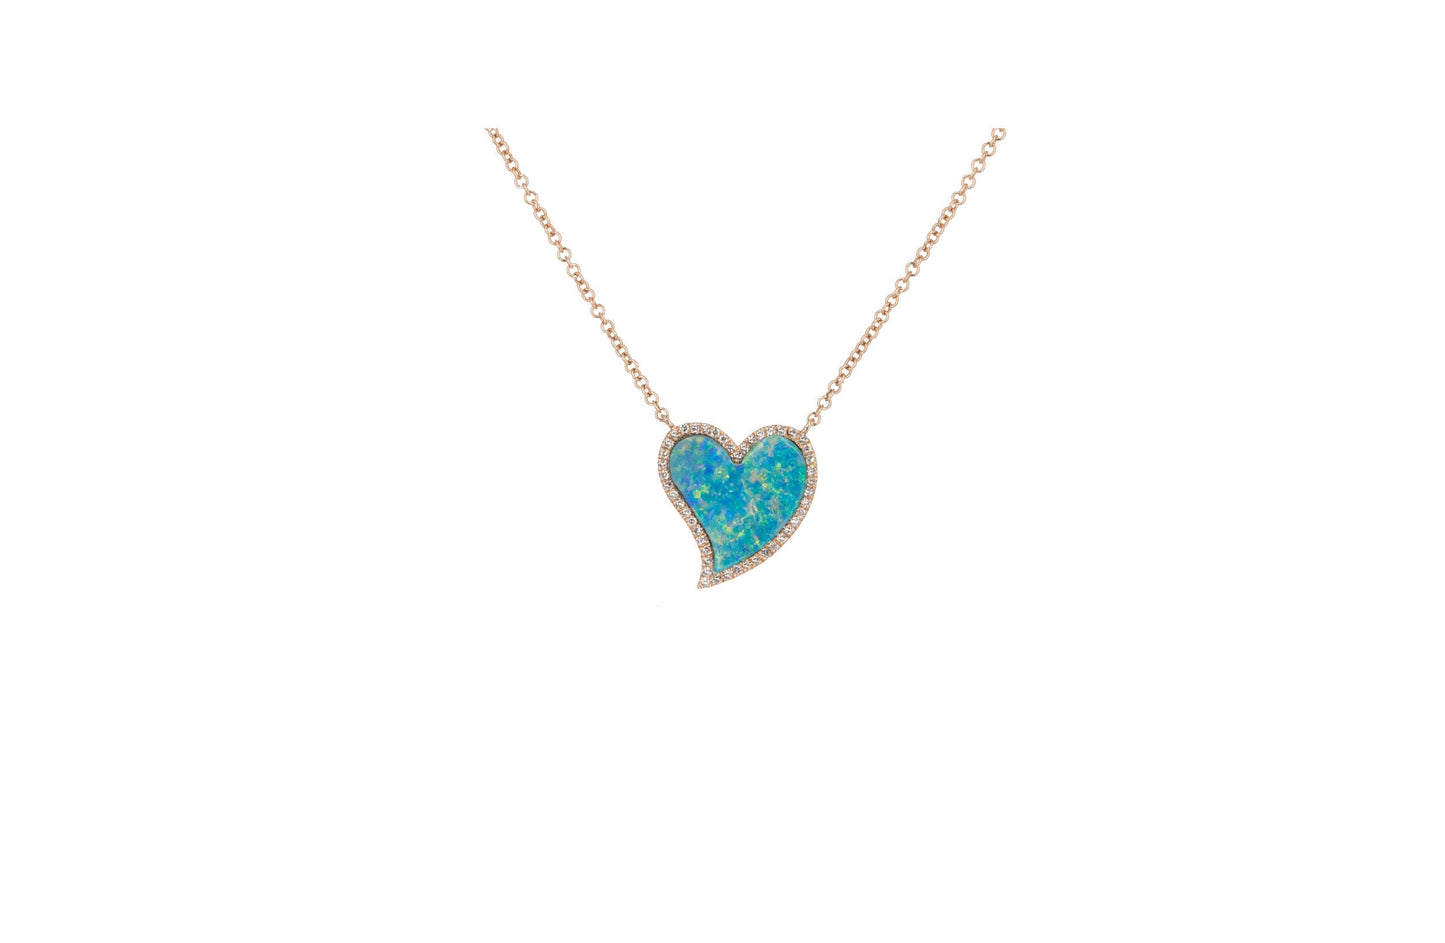 14KT Rose Gold Diamond Pave and Opal Heart Necklace